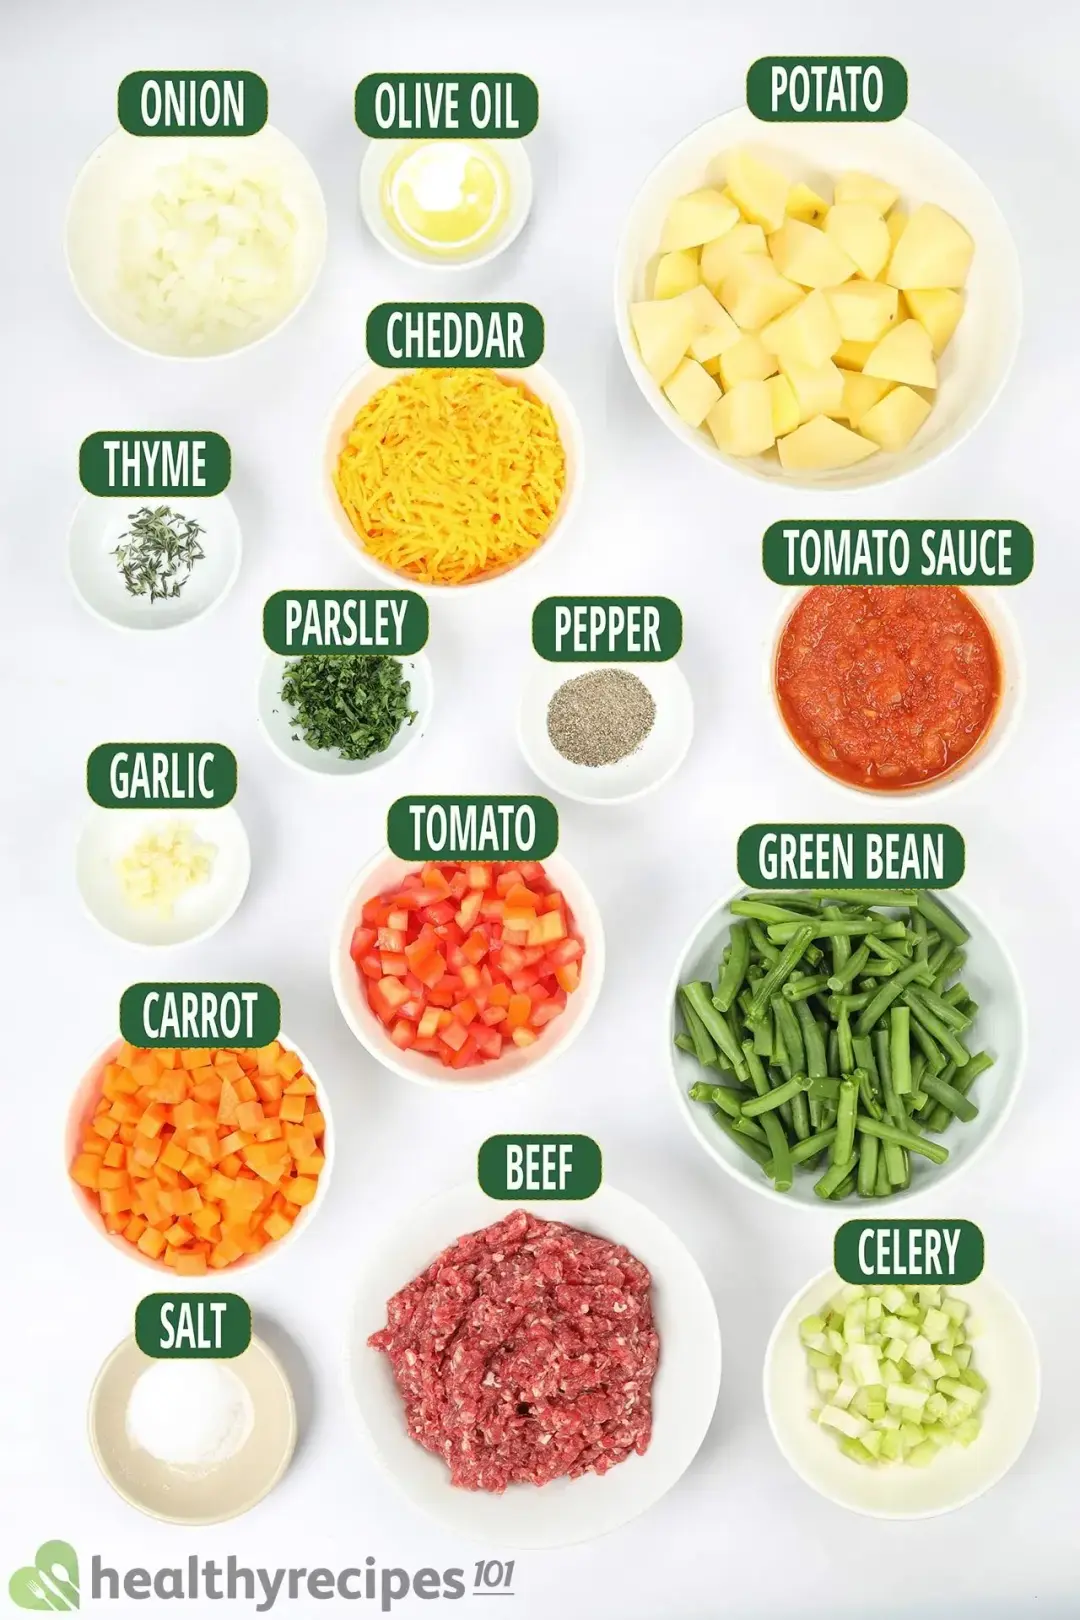 Ingredients for Vegetable Beef Casserole